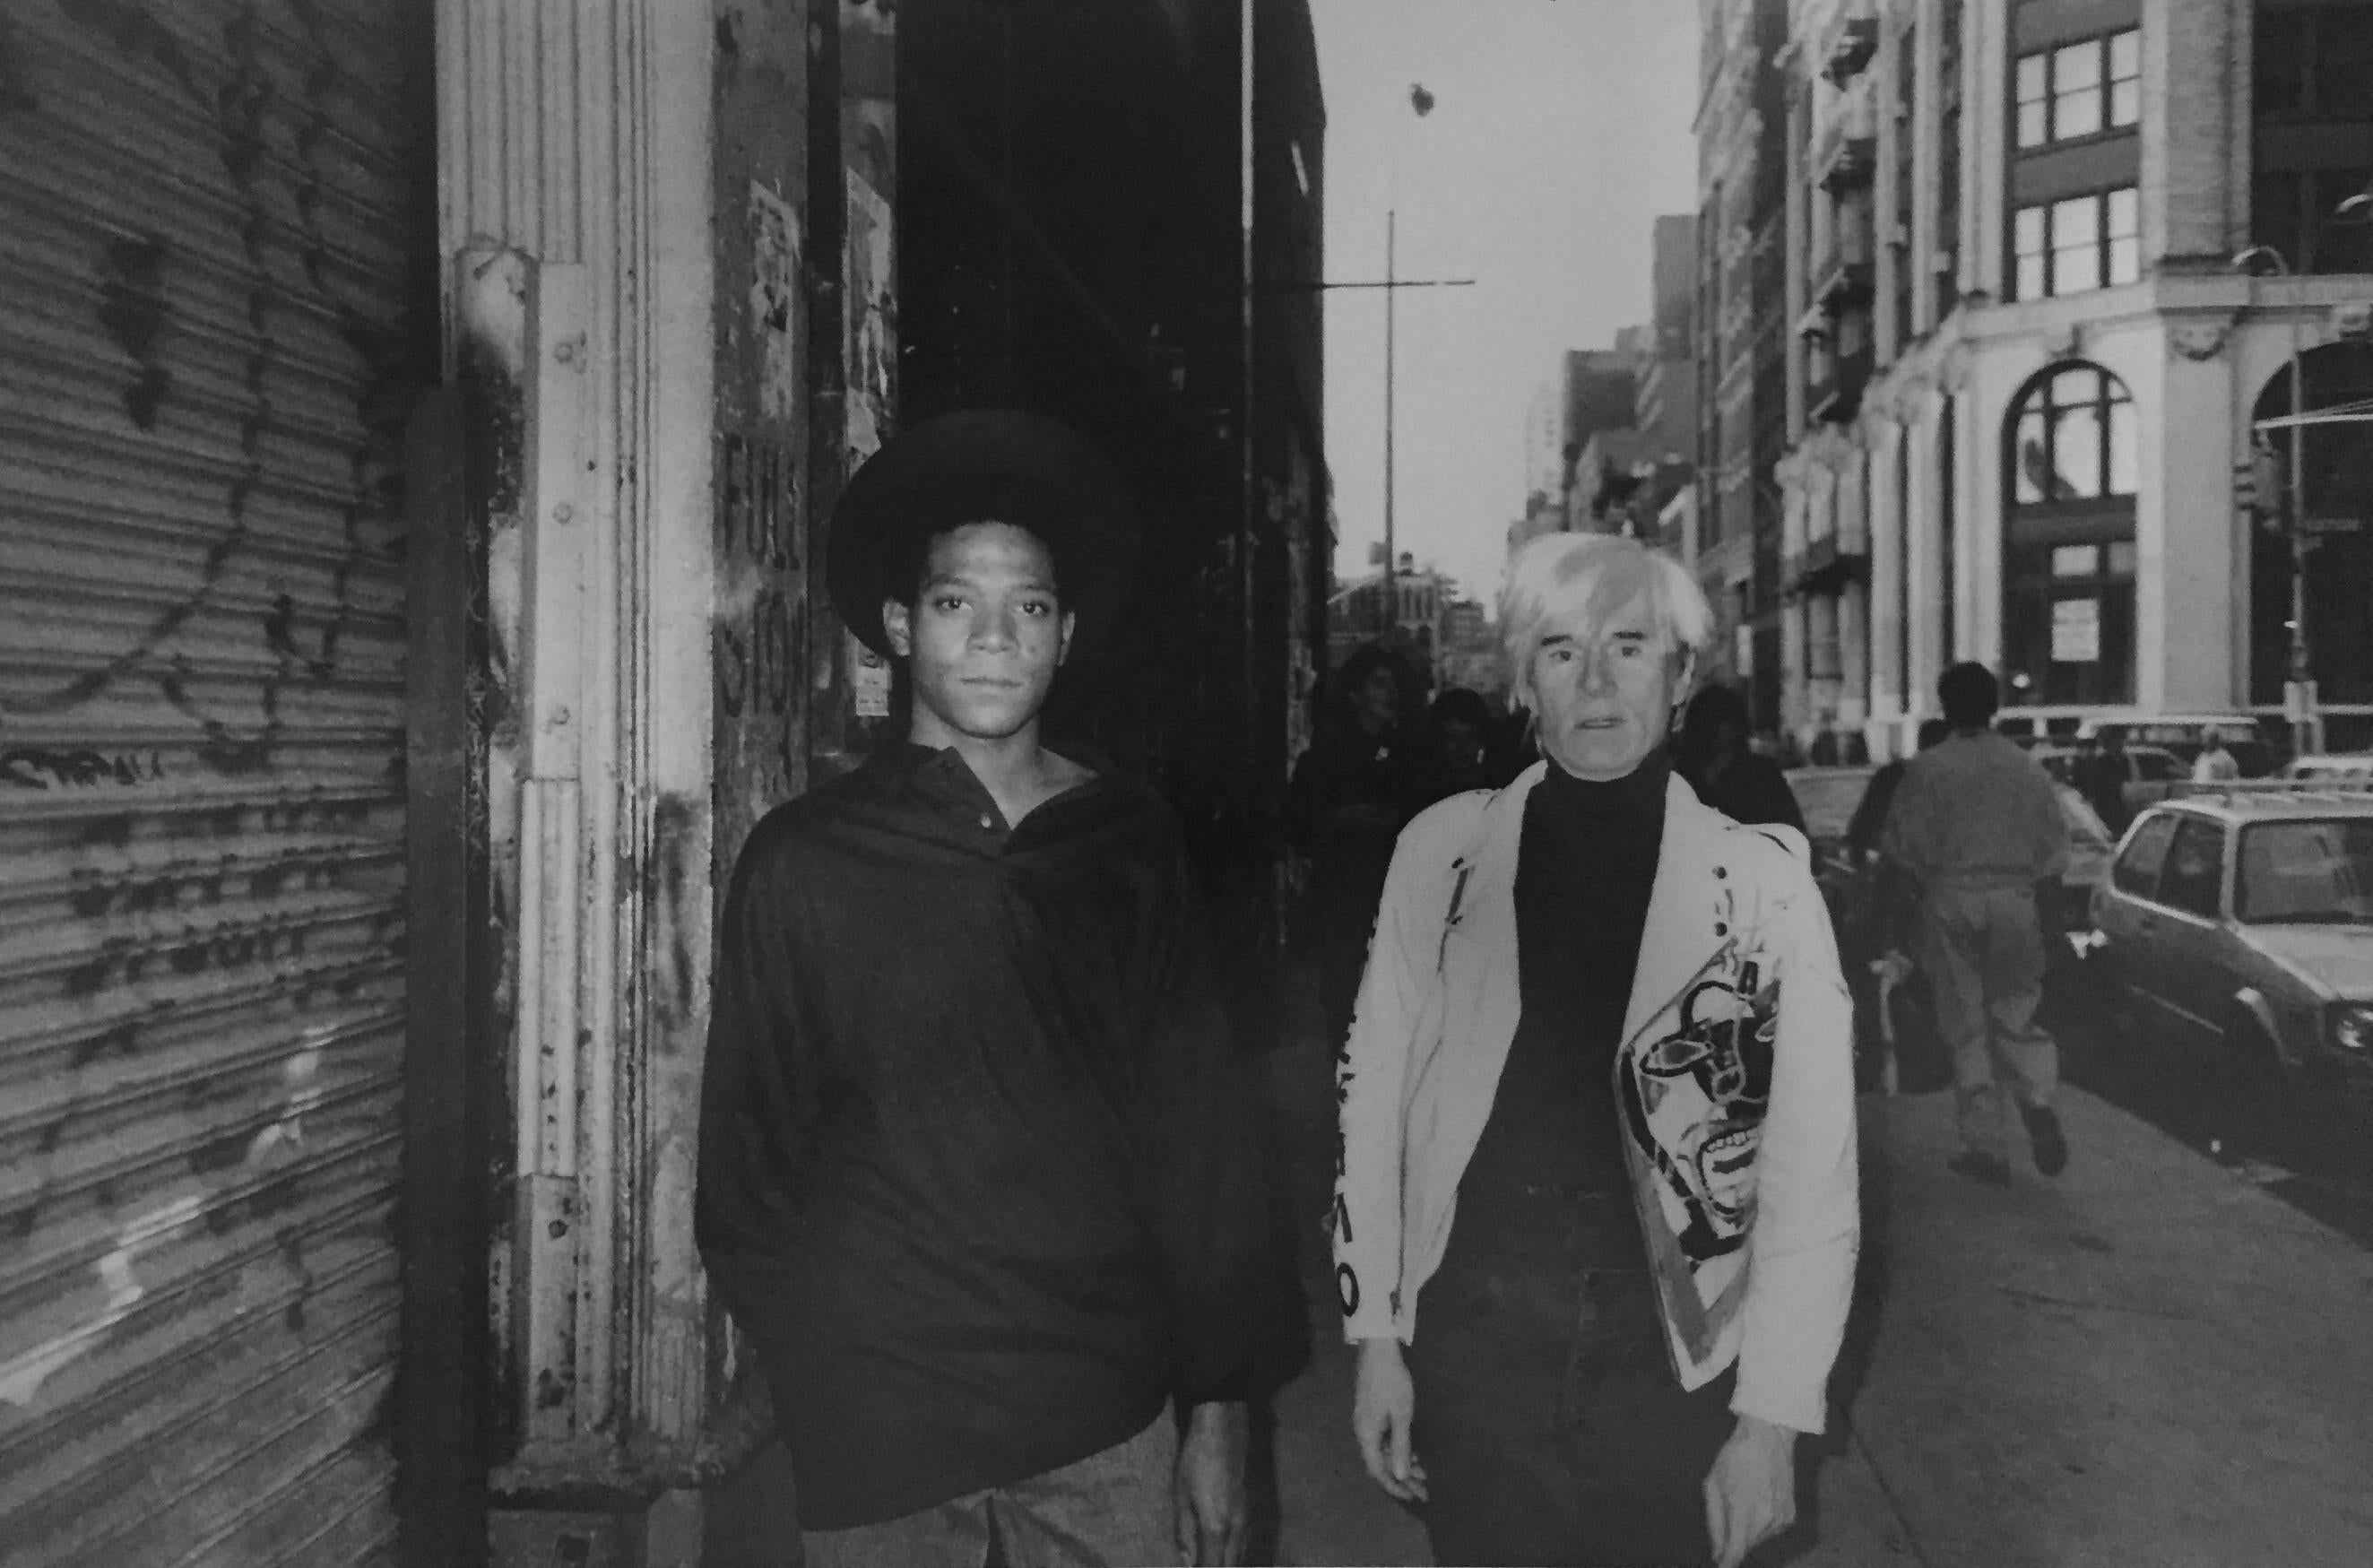 Ricky Powell Black and White Photograph - Andy Warhol and Jean-Michel Basquiat, Mercer Street, 1985 Edition 250